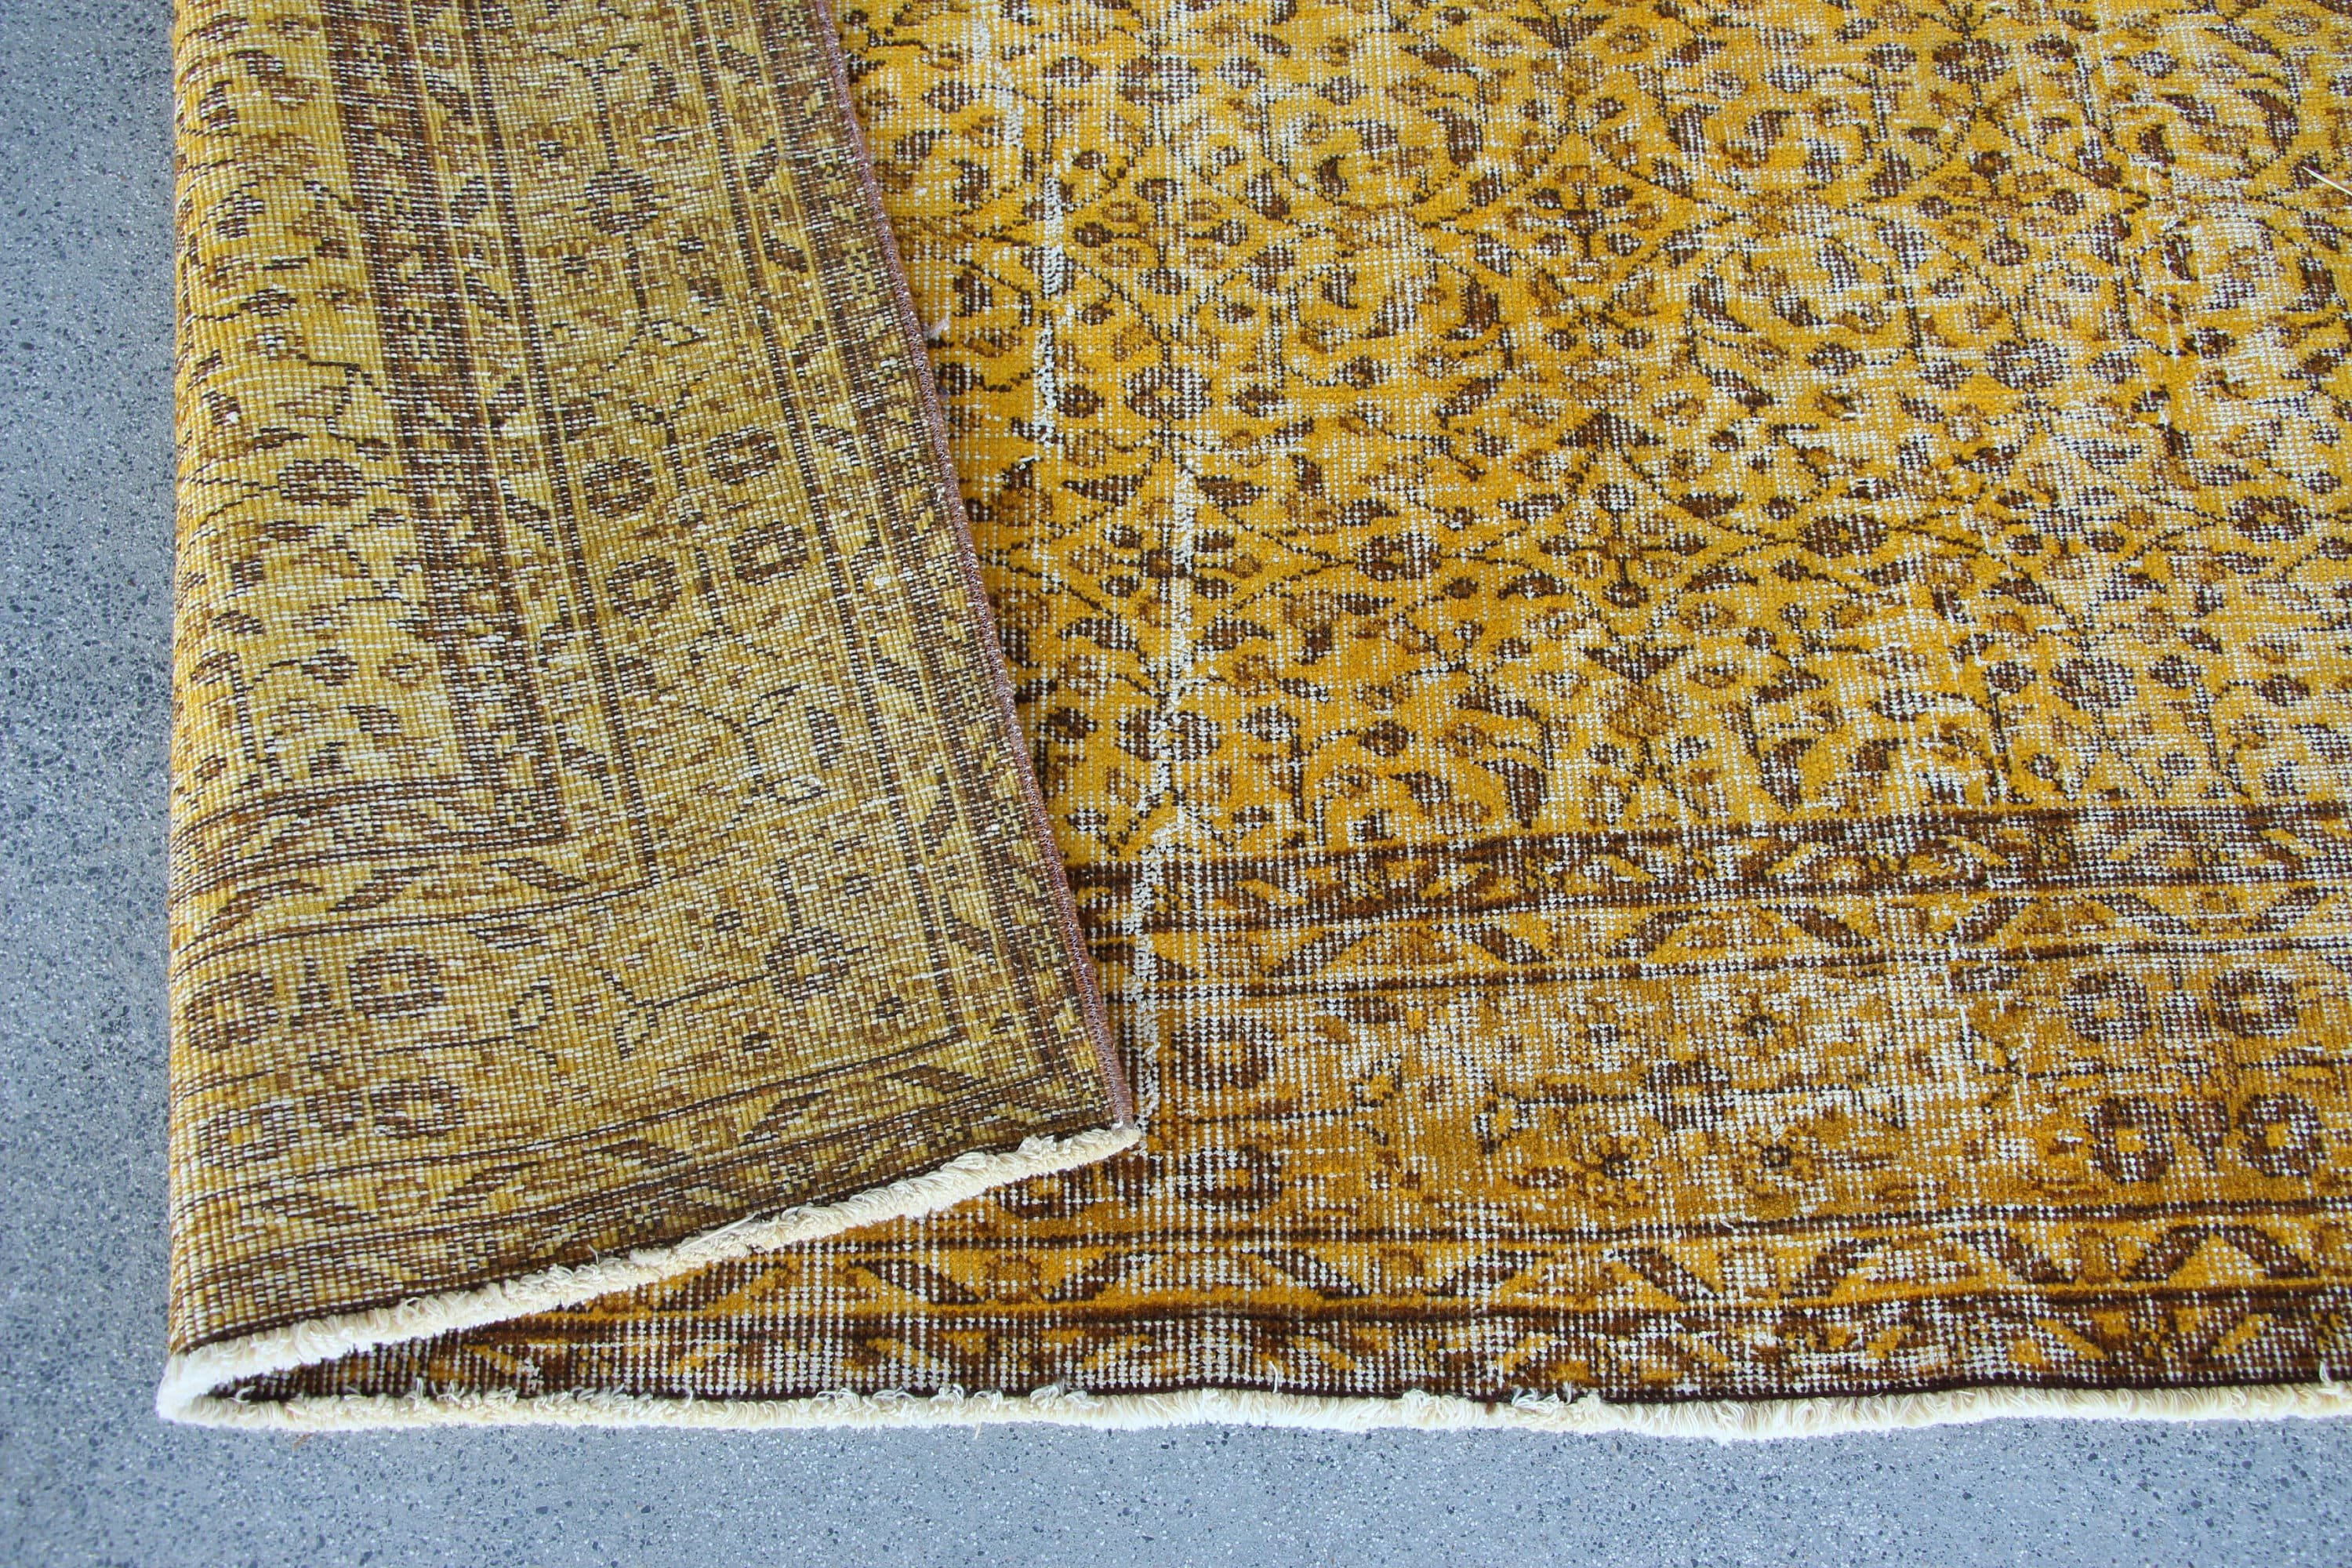 Turkish Rug, Antique Rug, Living Room Rugs, Dining Room Rug, Vintage Rug, Kitchen Rug, 7.1x10.2 ft Oversize Rugs, Yellow Cool Rugs